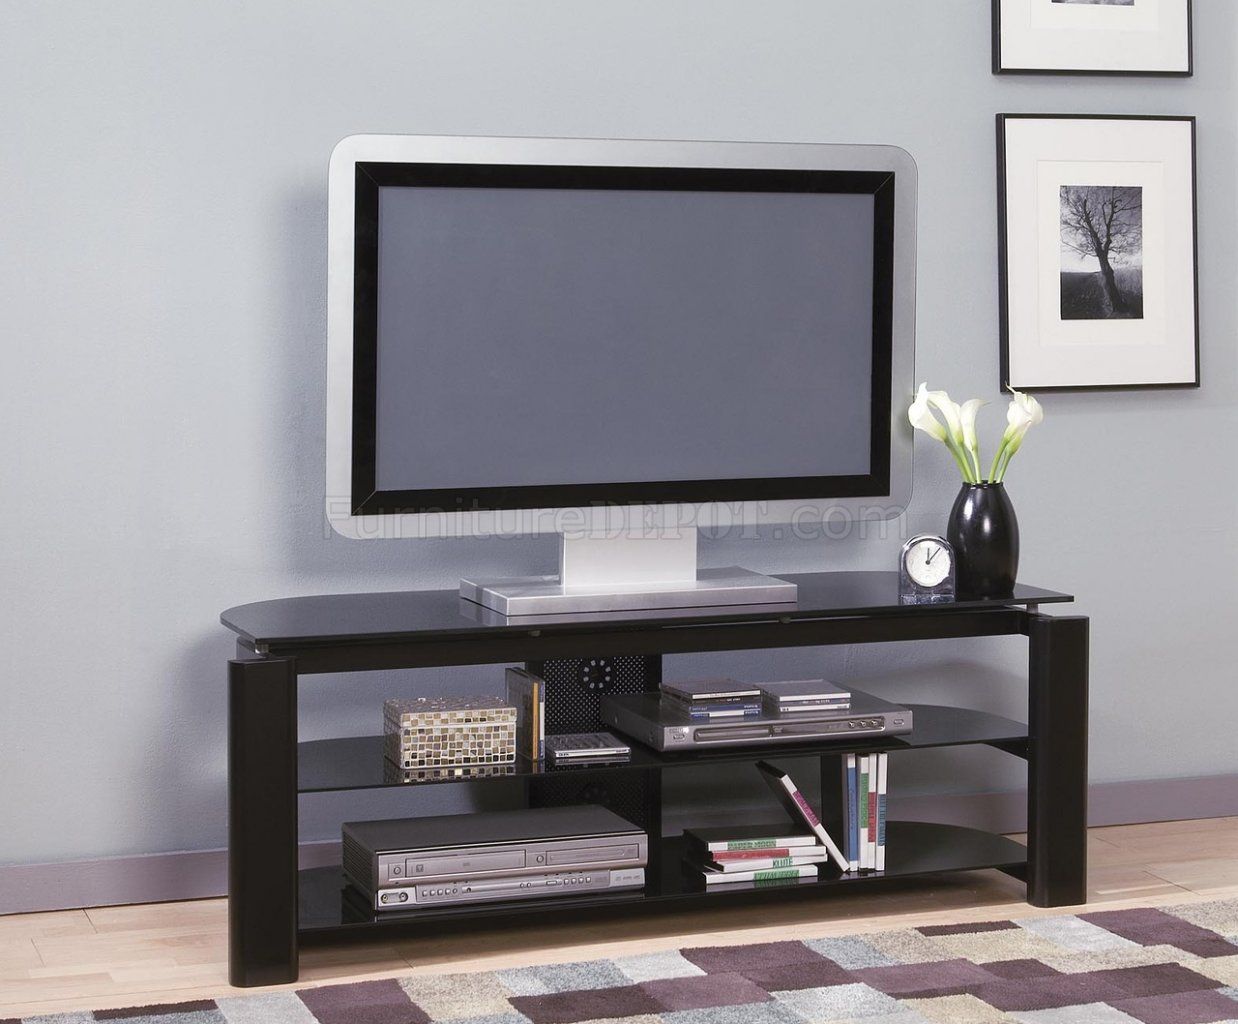 Black Glass & Metal Modern Tv Stand W/storage Shelves Pertaining To Stylish Tv Stands (View 8 of 15)